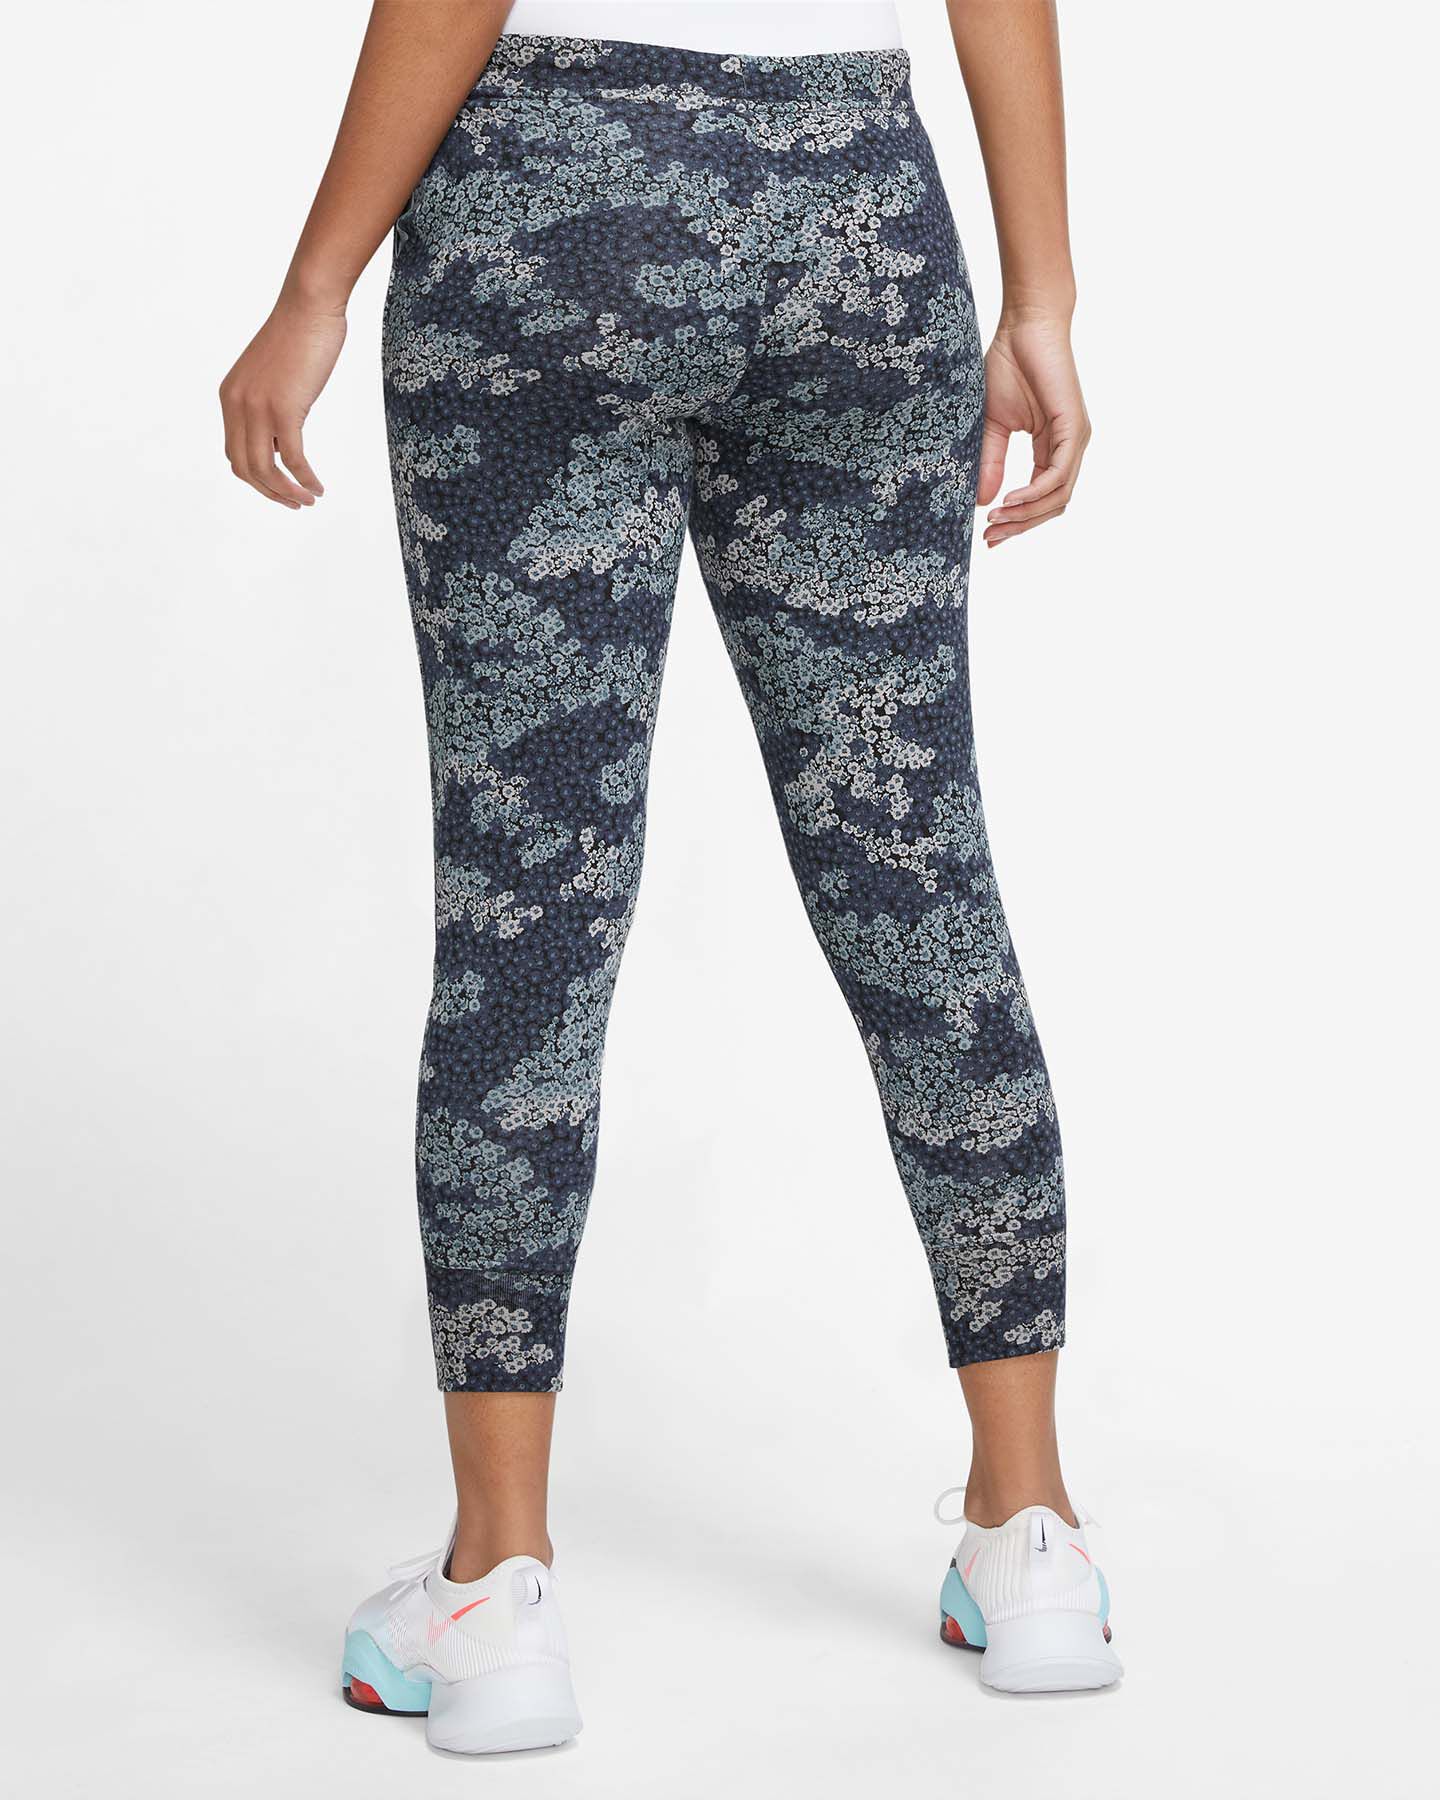  Pantalone training NIKE 7/8 CP AOP FLORAL W S5374583|041|M scatto 1